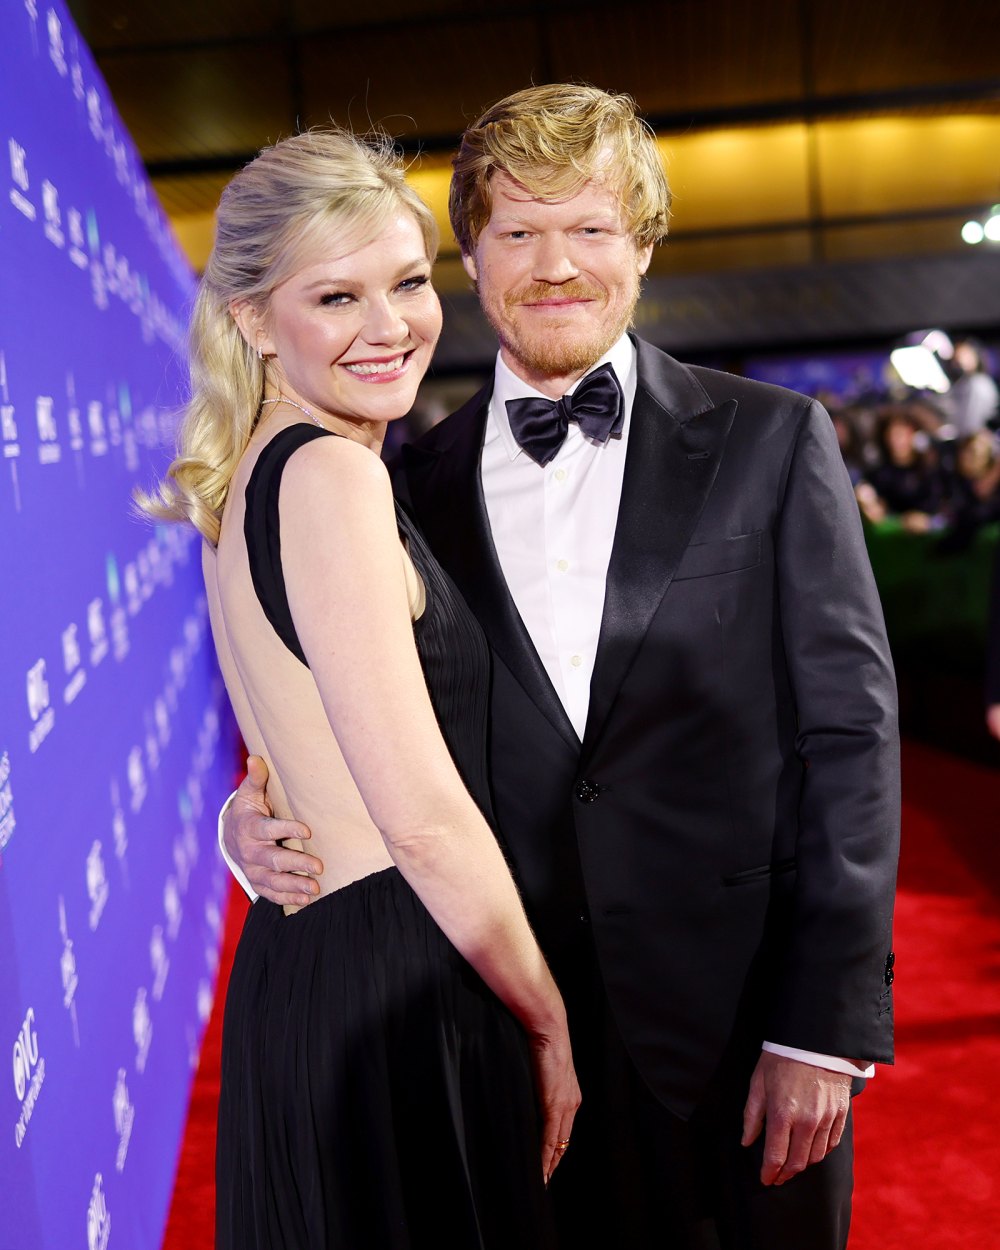 Inside Kirsten Dunst and Jesse Plemons' Love for Onscreen Collaboration: 'A Lot of Fun for Them'